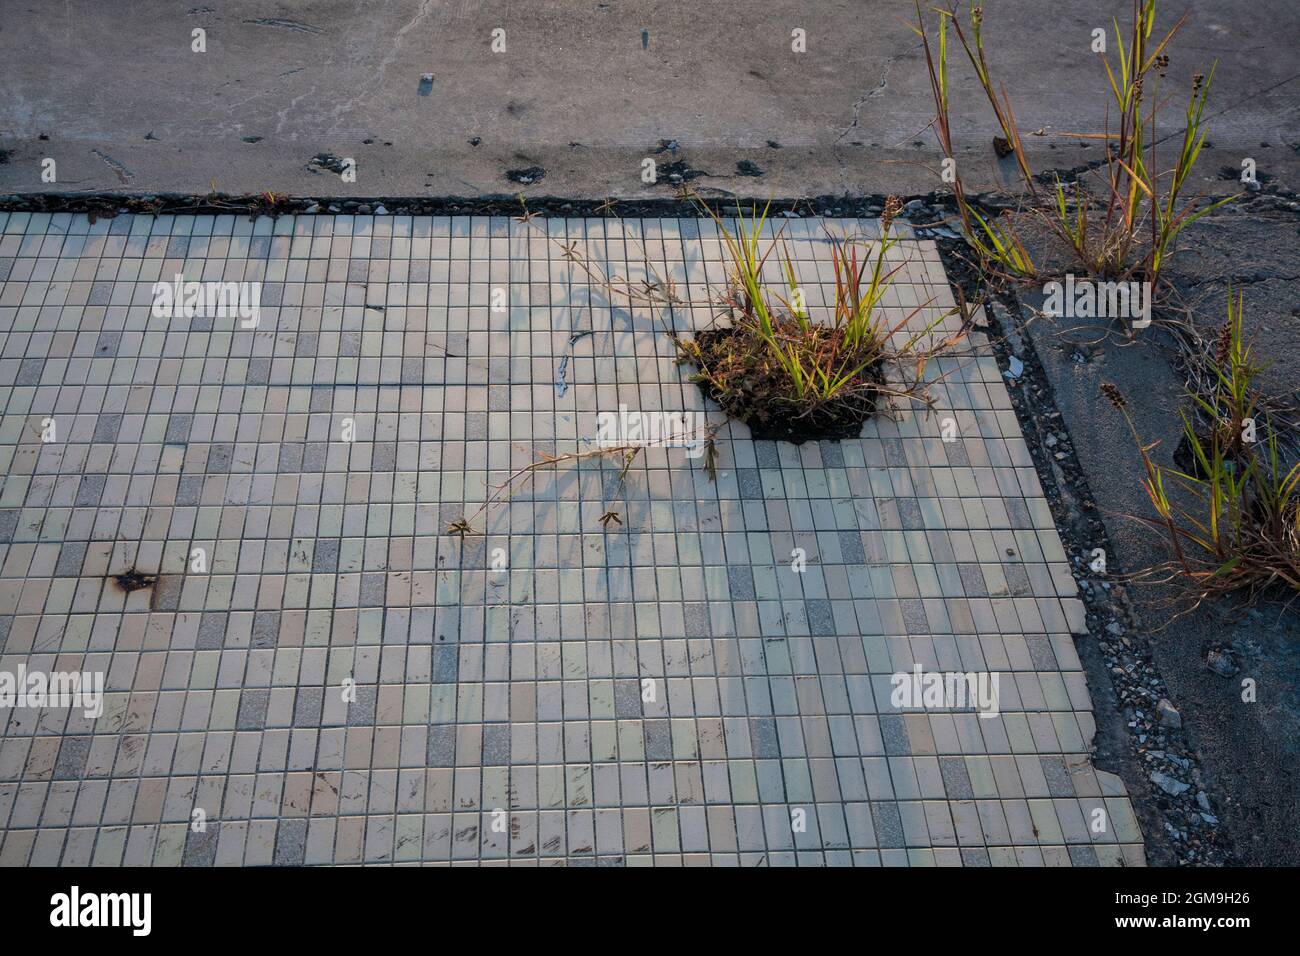 Grass sprouts through hole in tiled entryway, remains of bank (destroyed by Hurricane Ike in 2008), corner of School St and Marshall St, Cameron, LA. Stock Photo